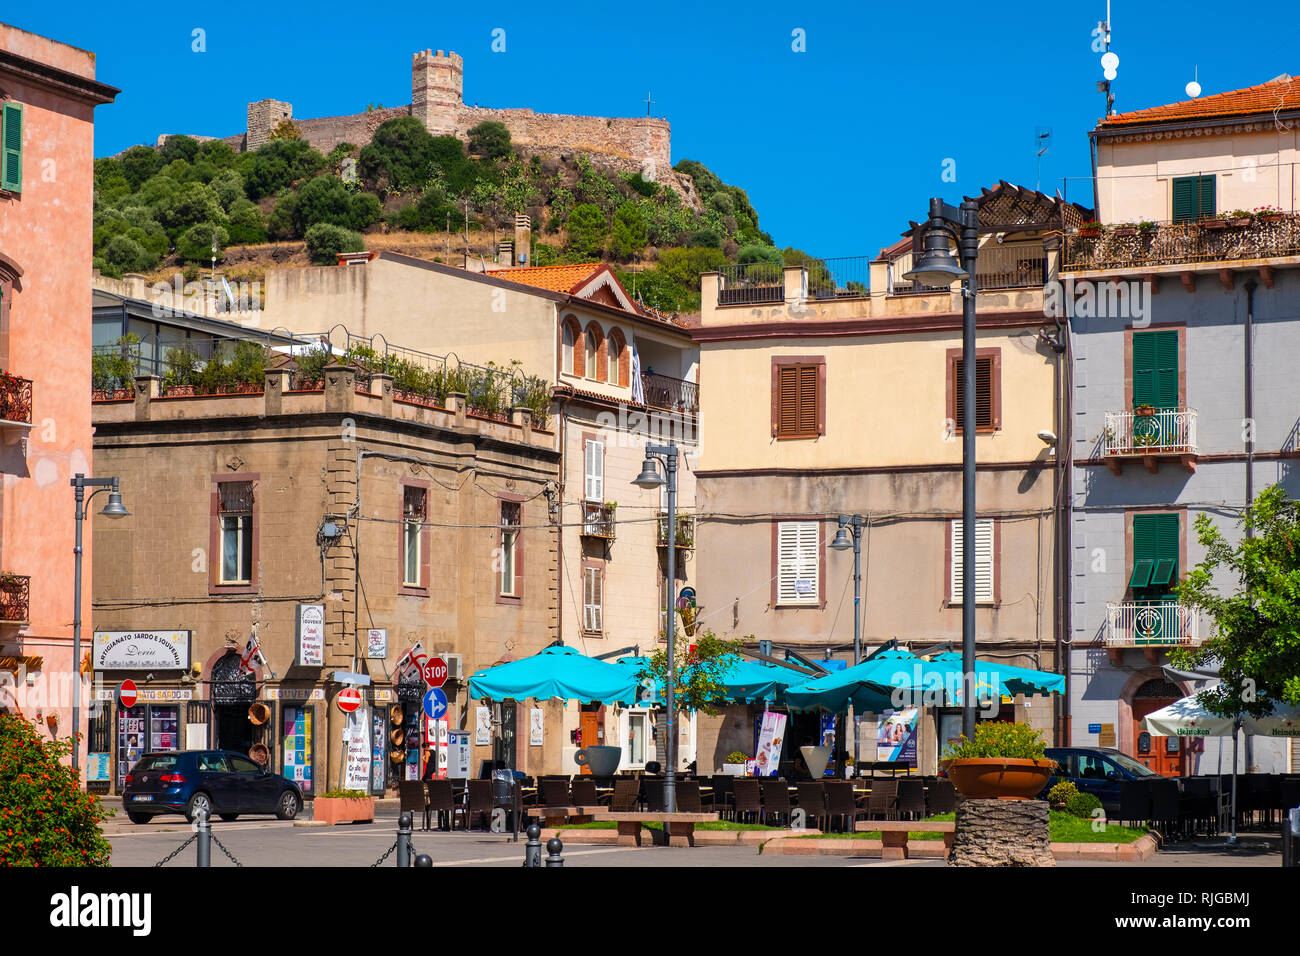 Bosa, Sardinia / Italy - 2018/08/13: Memorial of the Fallen - Via Giobetti street in the town of Bosa city center with Malaspina Castle, known as Cast Stock Photo